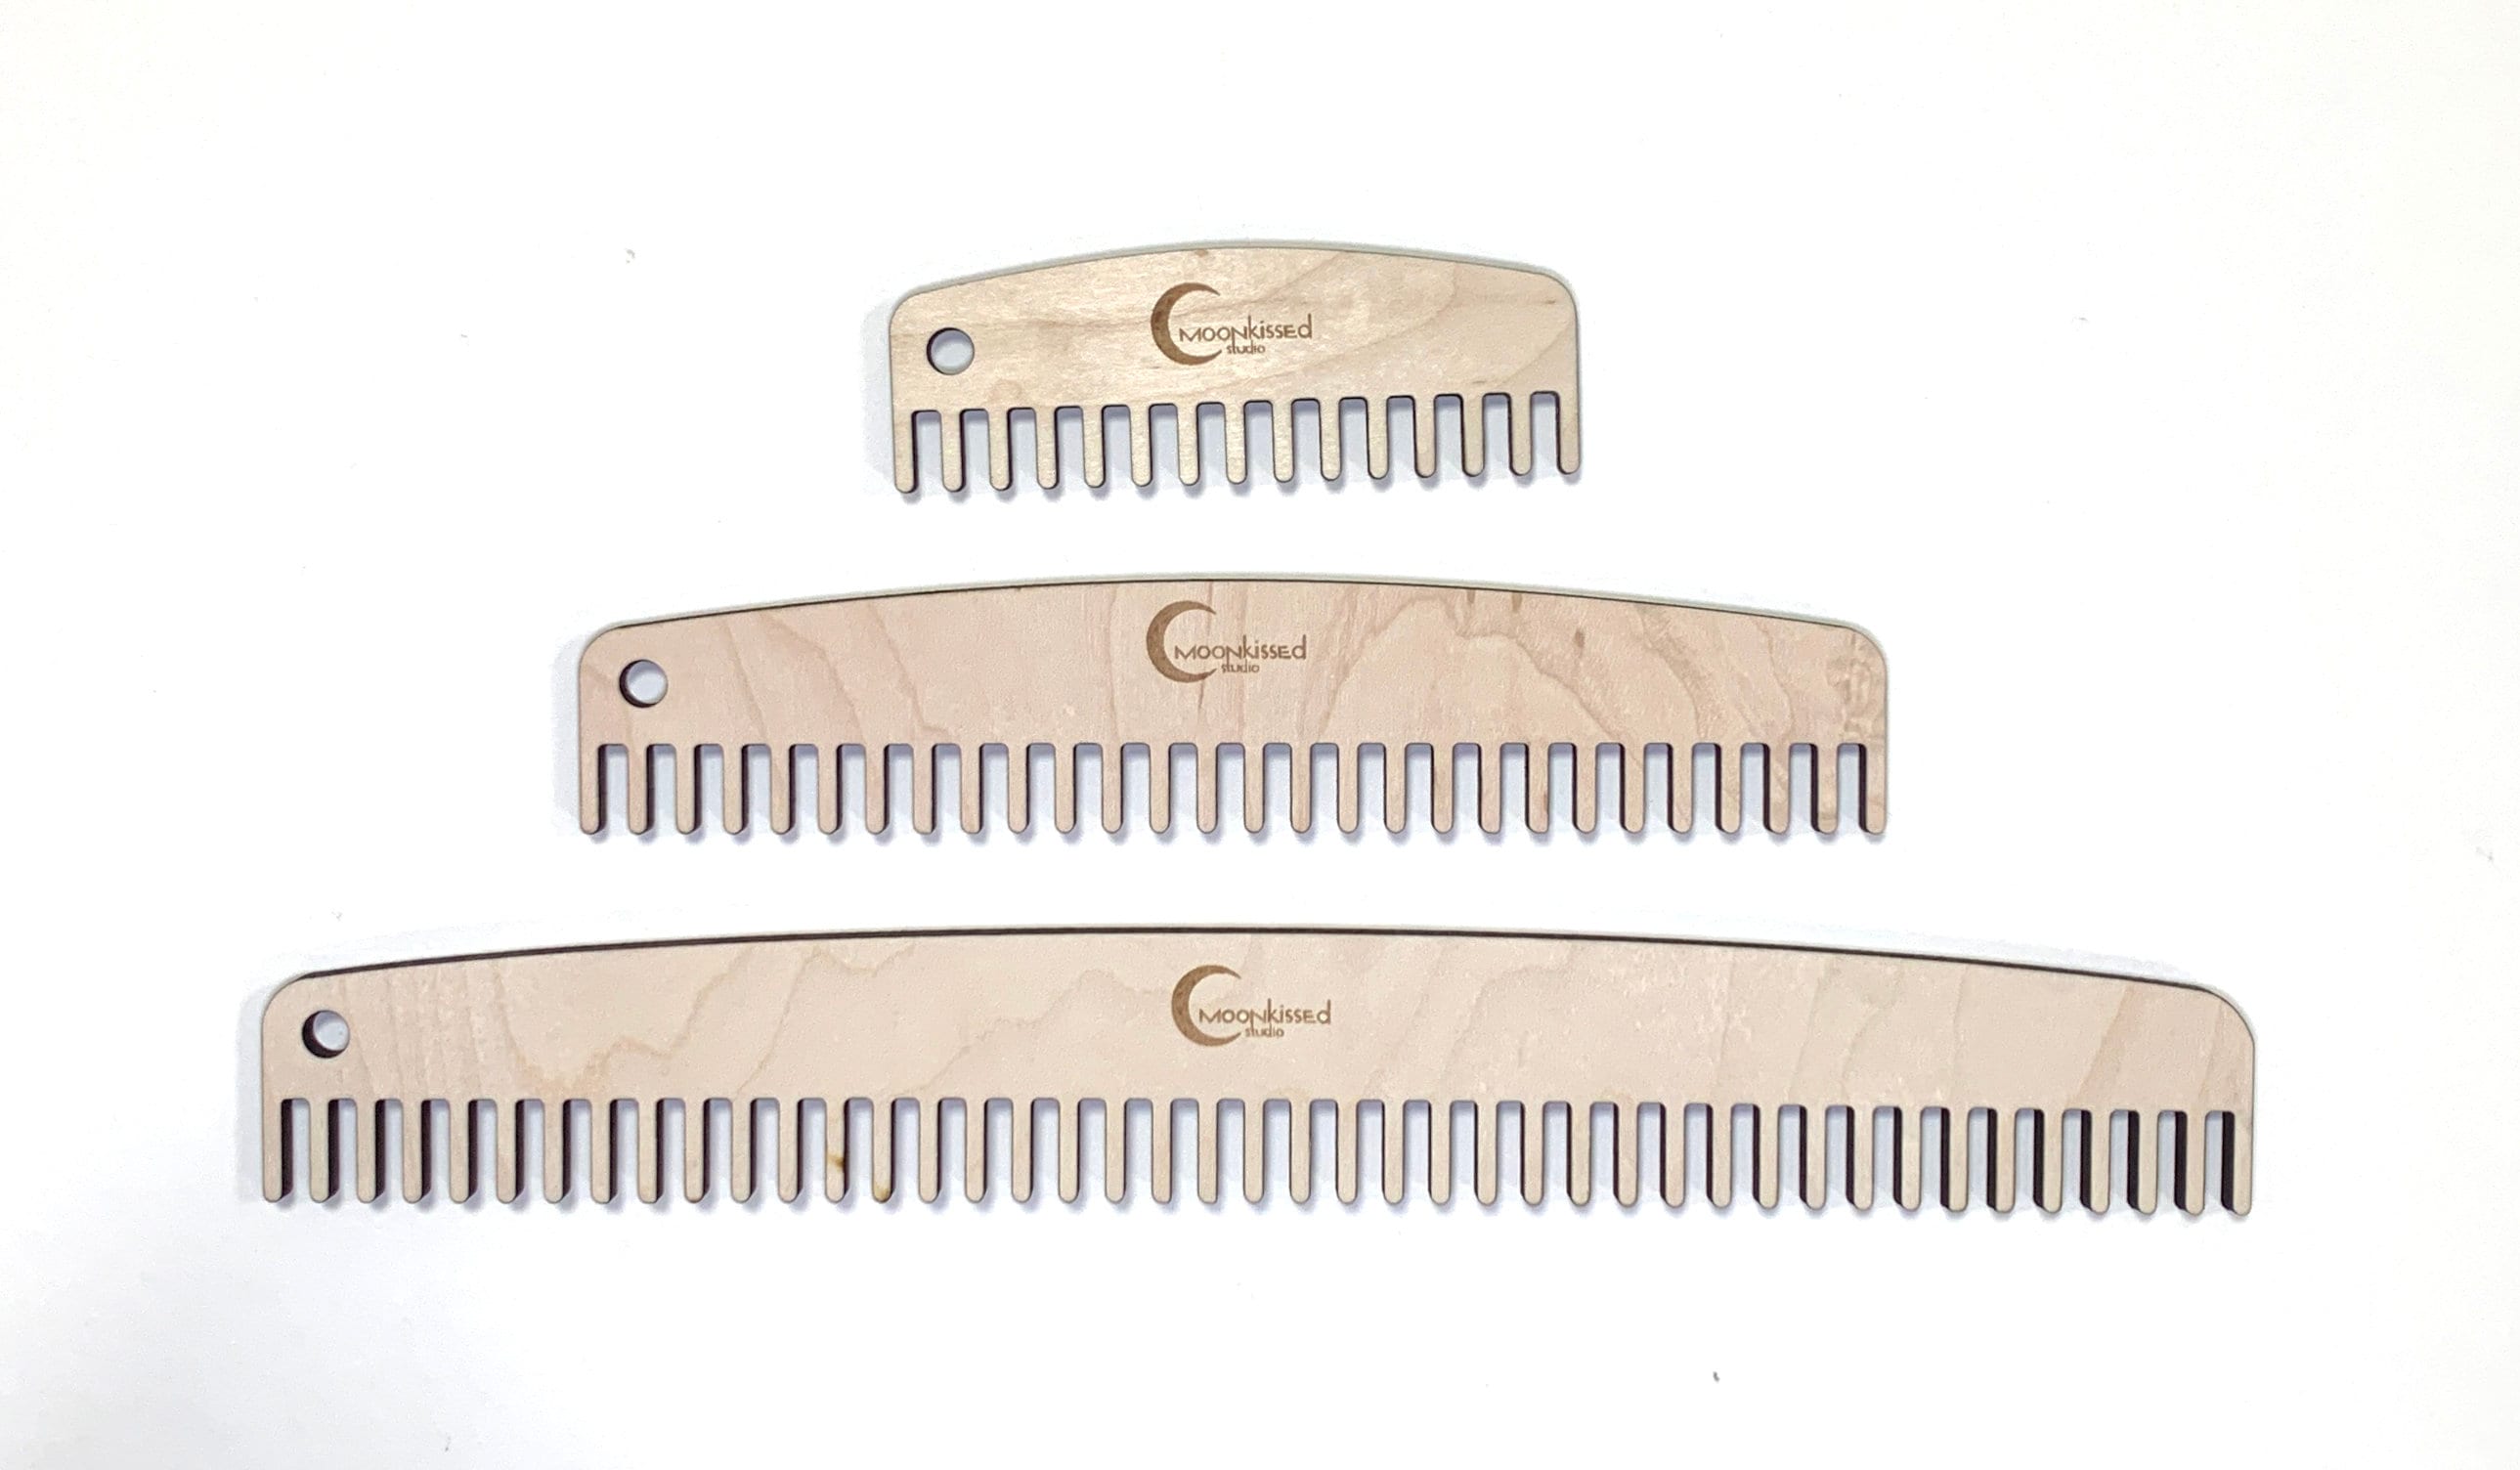 Wood Weaving Loom Comb DIY Braided Tools Crafts Weaving Tool Double-Ended